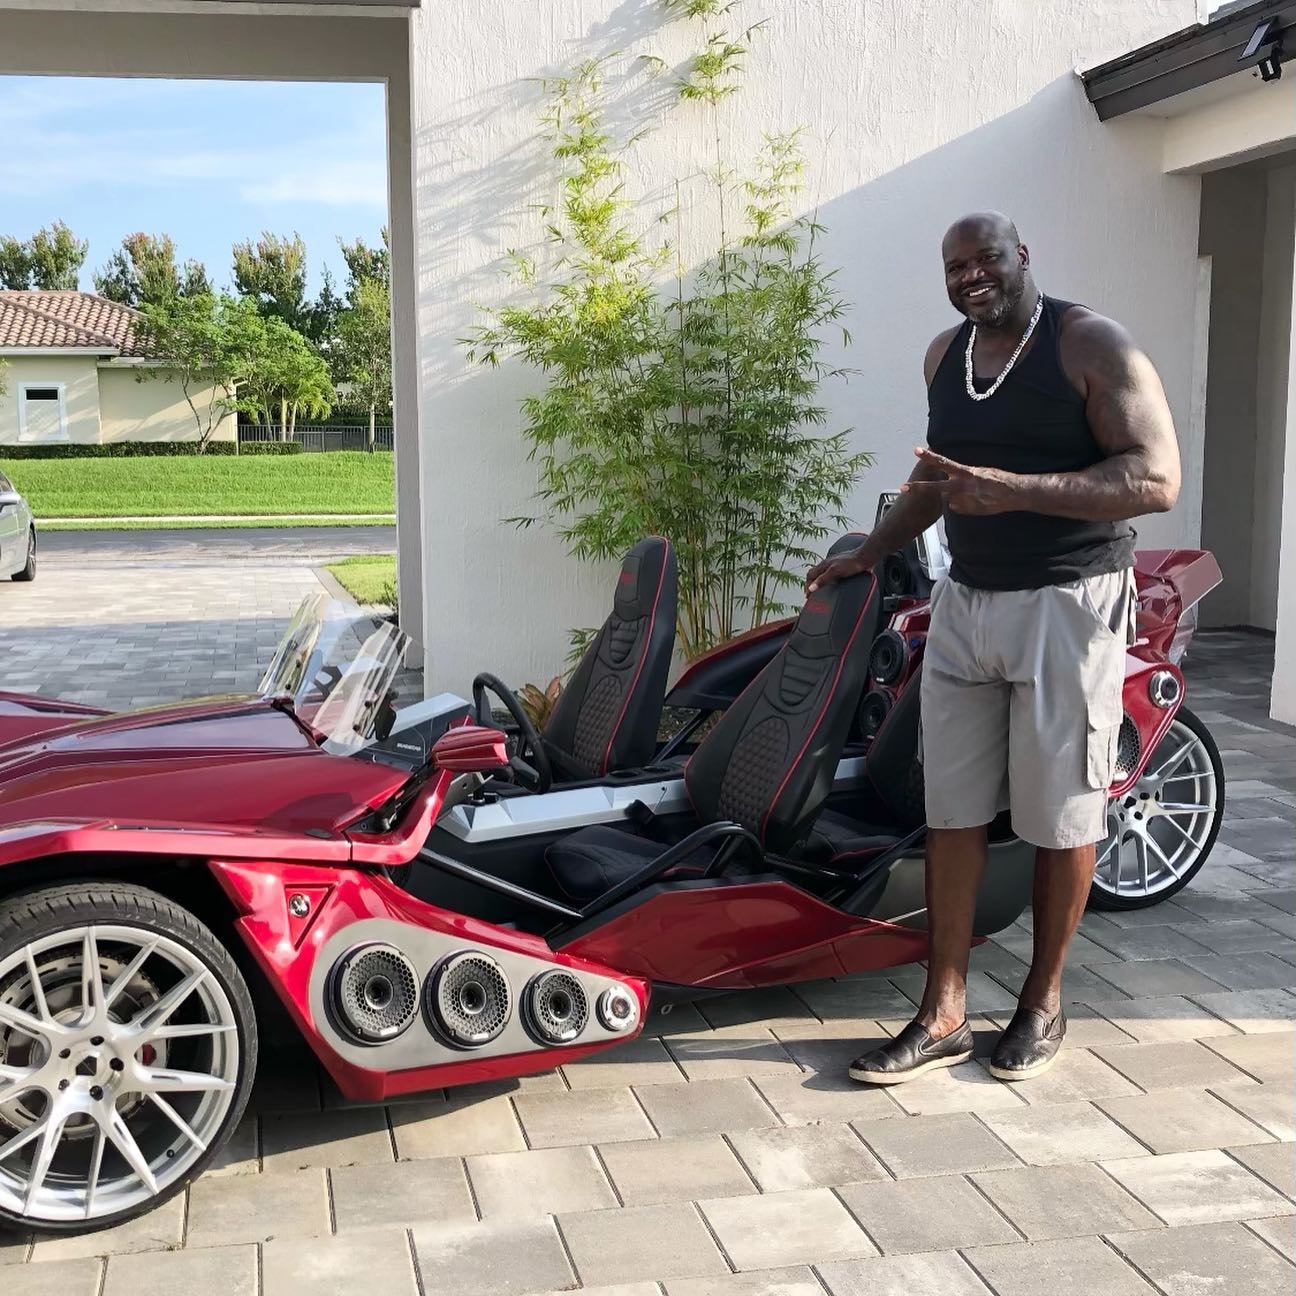 Exploring Shaquille O’Neal’s Exquisite Car Collection, Including a $400,000 Rolls-Royce Gifted to LeBron James